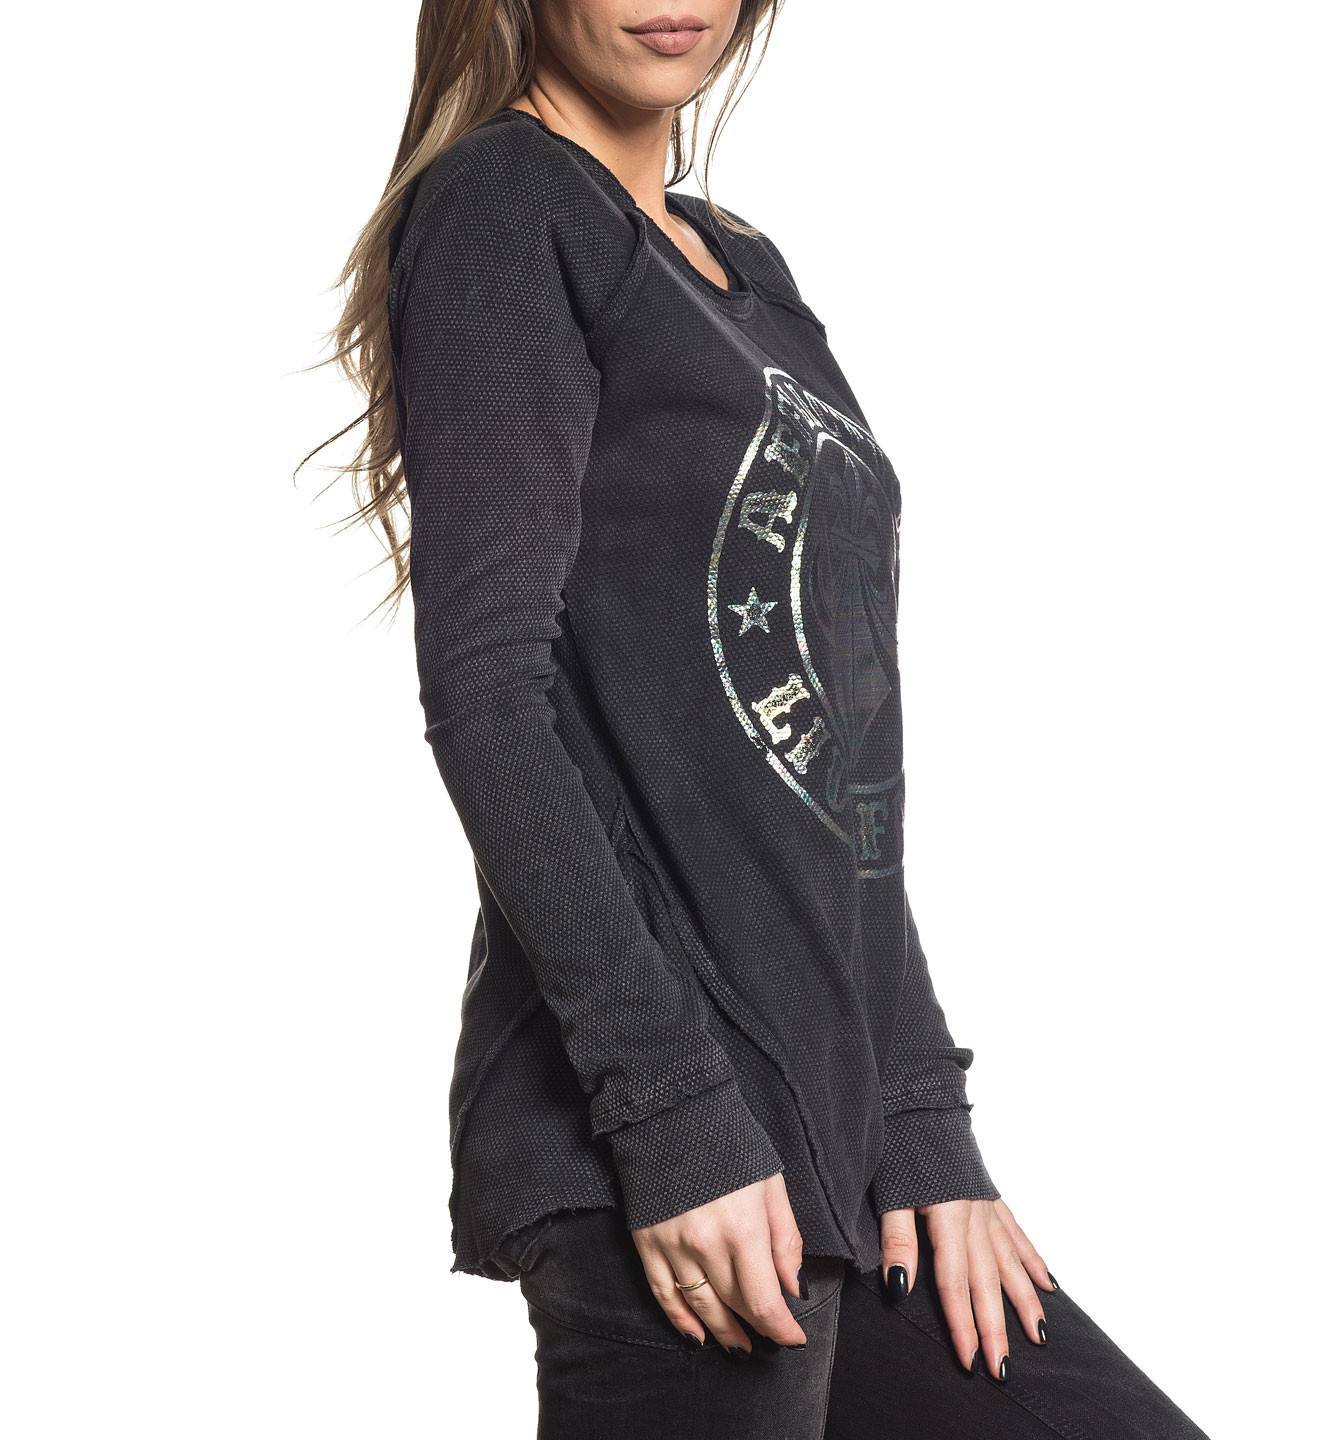 Divio Empire - Womens Long Sleeve Tees - Affliction Clothing